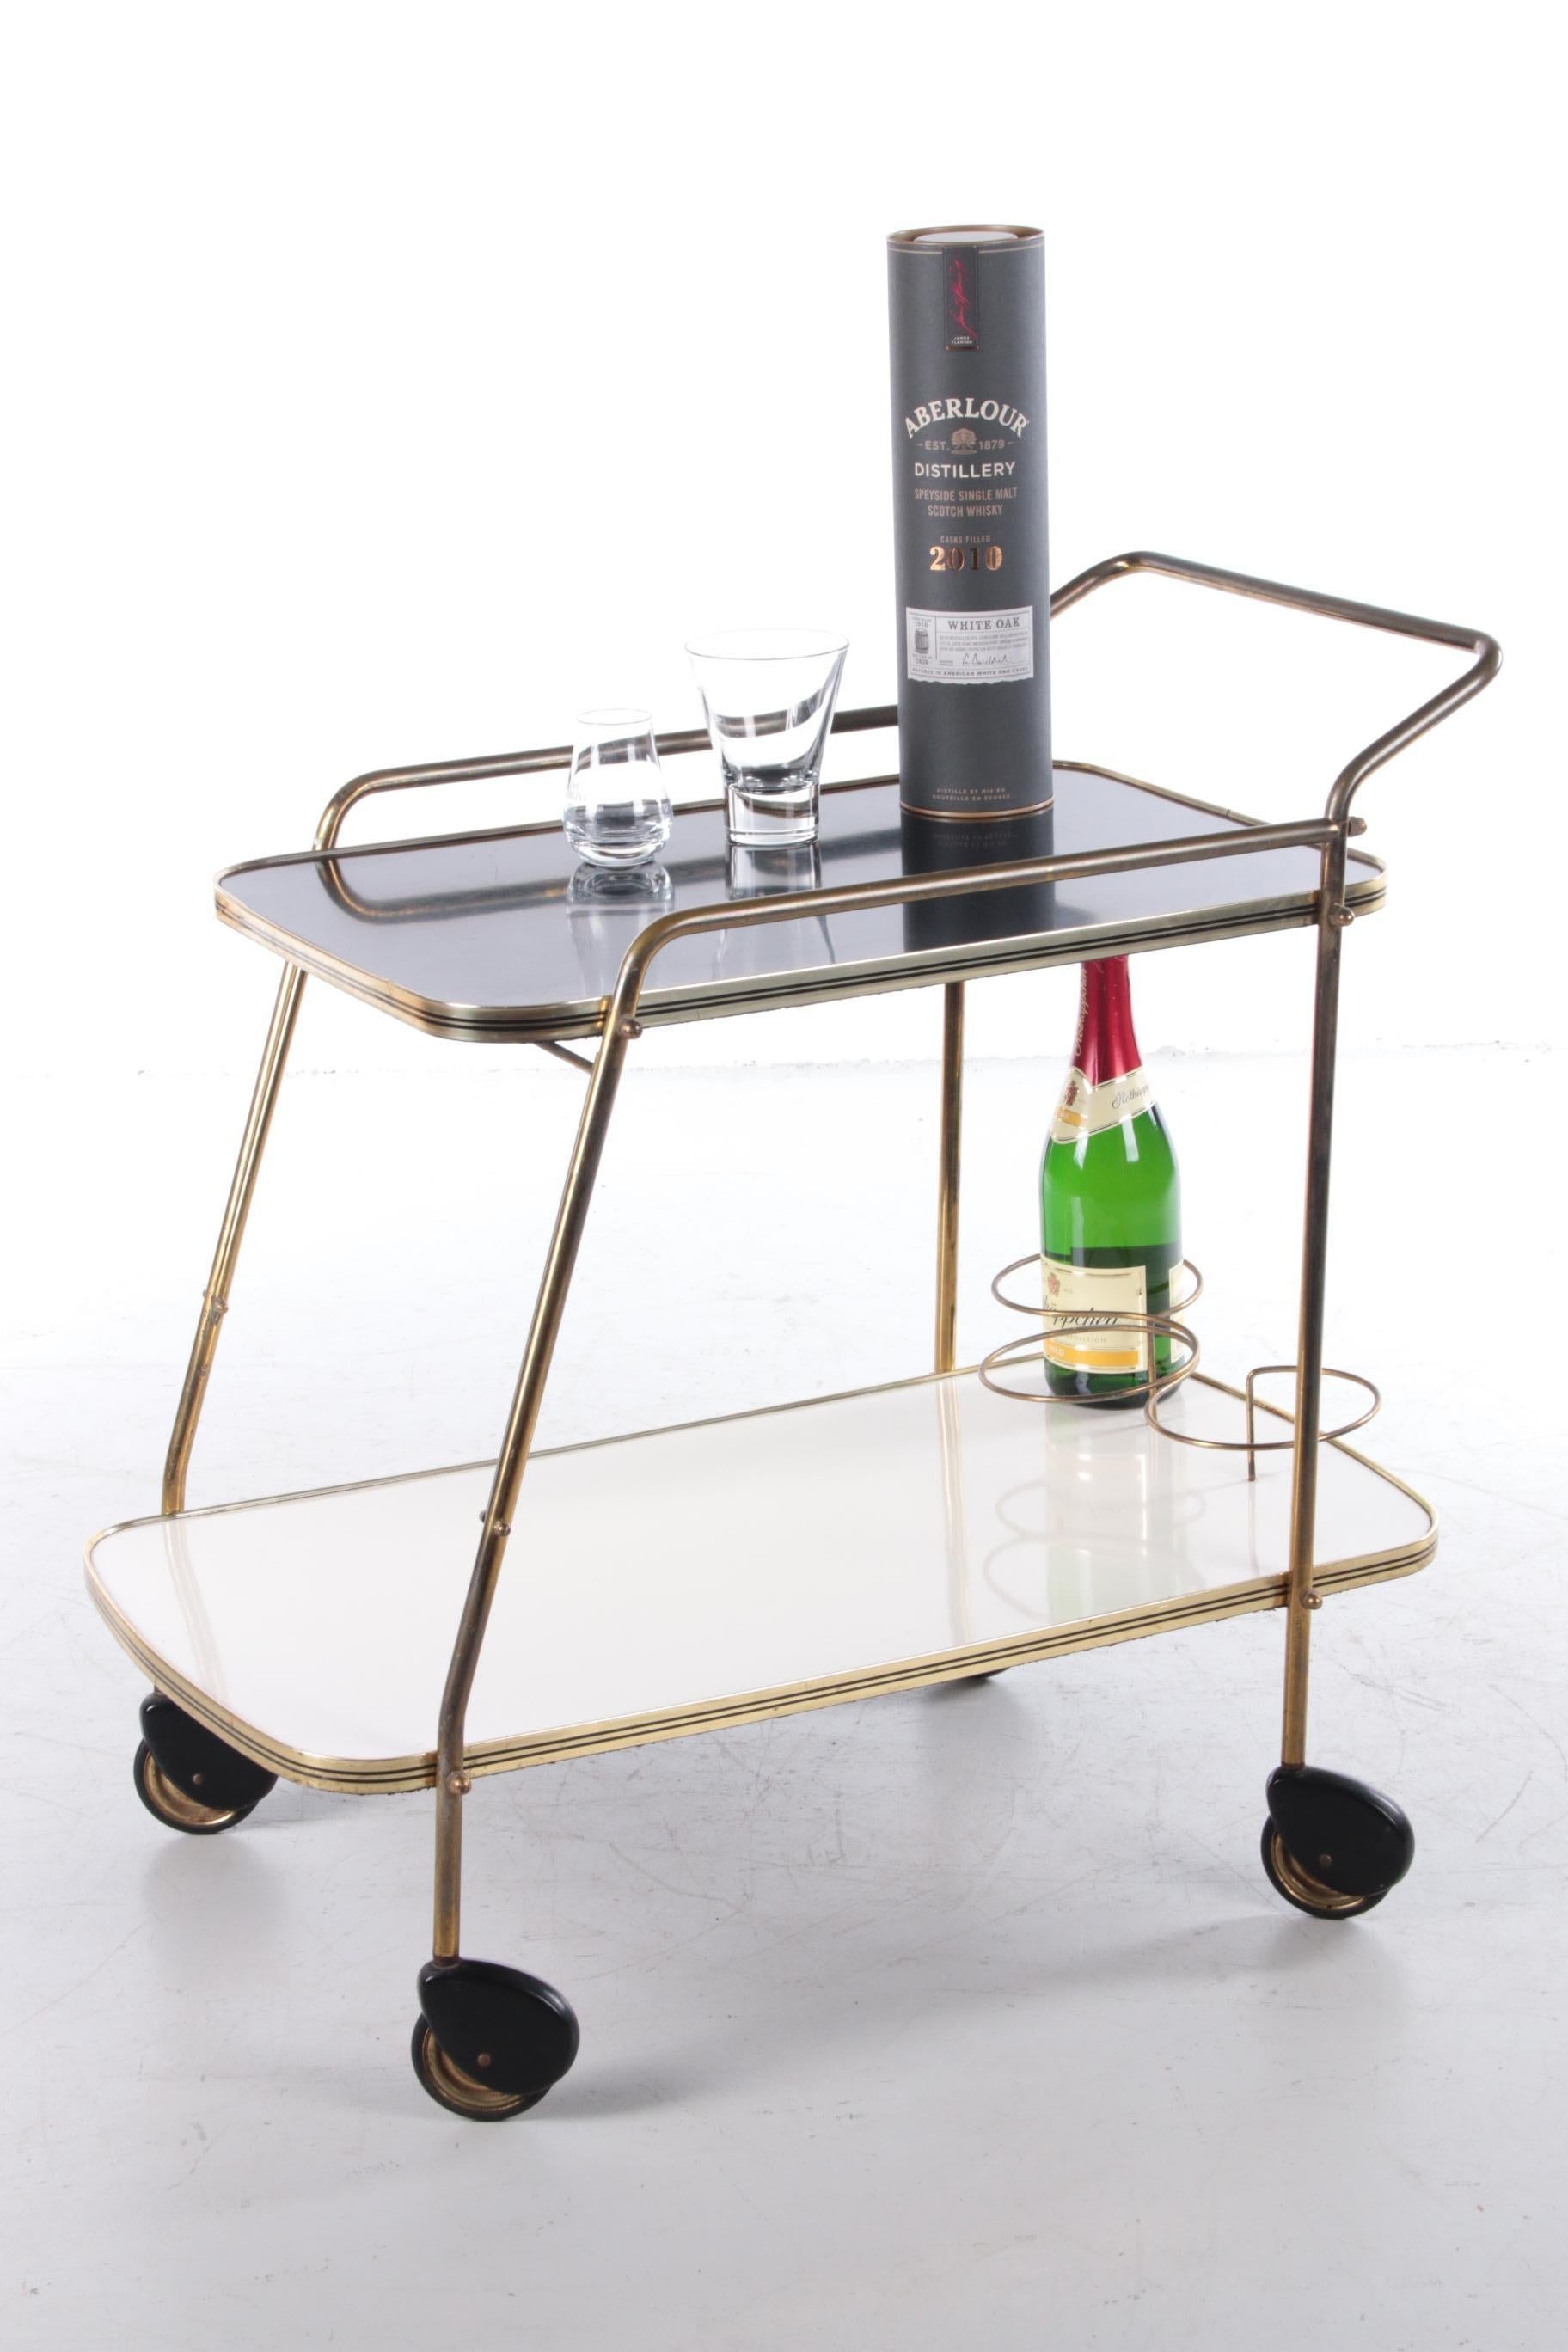 Vintage Trolley tea cart or beautiful bar cart, 1960s


This is a beautiful trolley from the 1960s.

The lower tray is white and the upper tray is black. The frame is made of beautiful gold brass. On the lower floor there is also a nice rack to